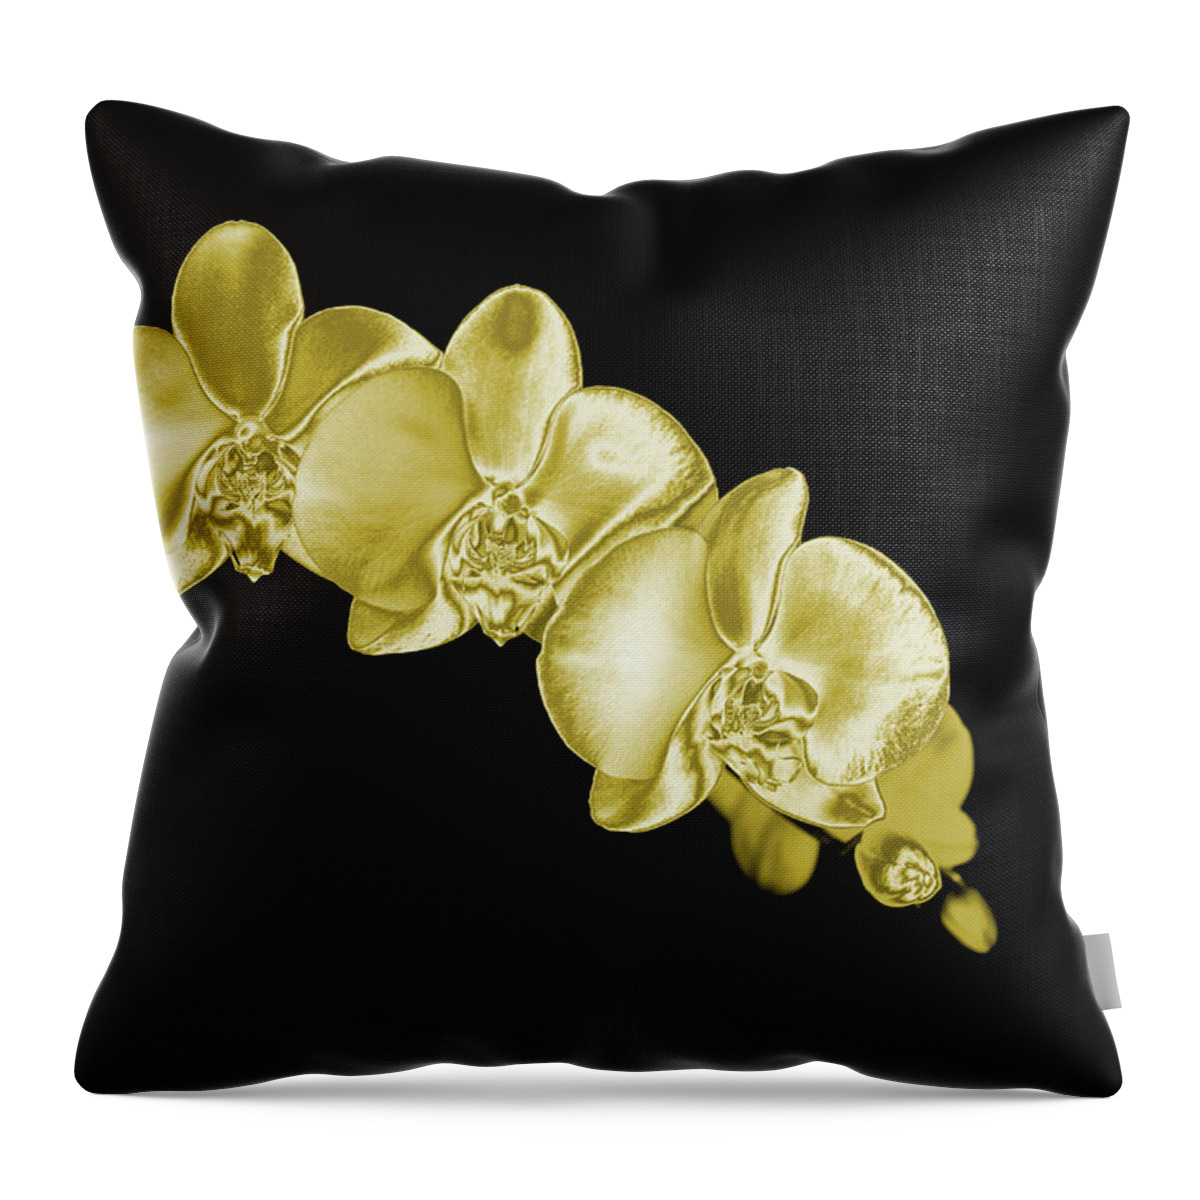 Black Background Throw Pillow featuring the photograph Gold Phaelenopsis Orchid On A Black by Mike Hill